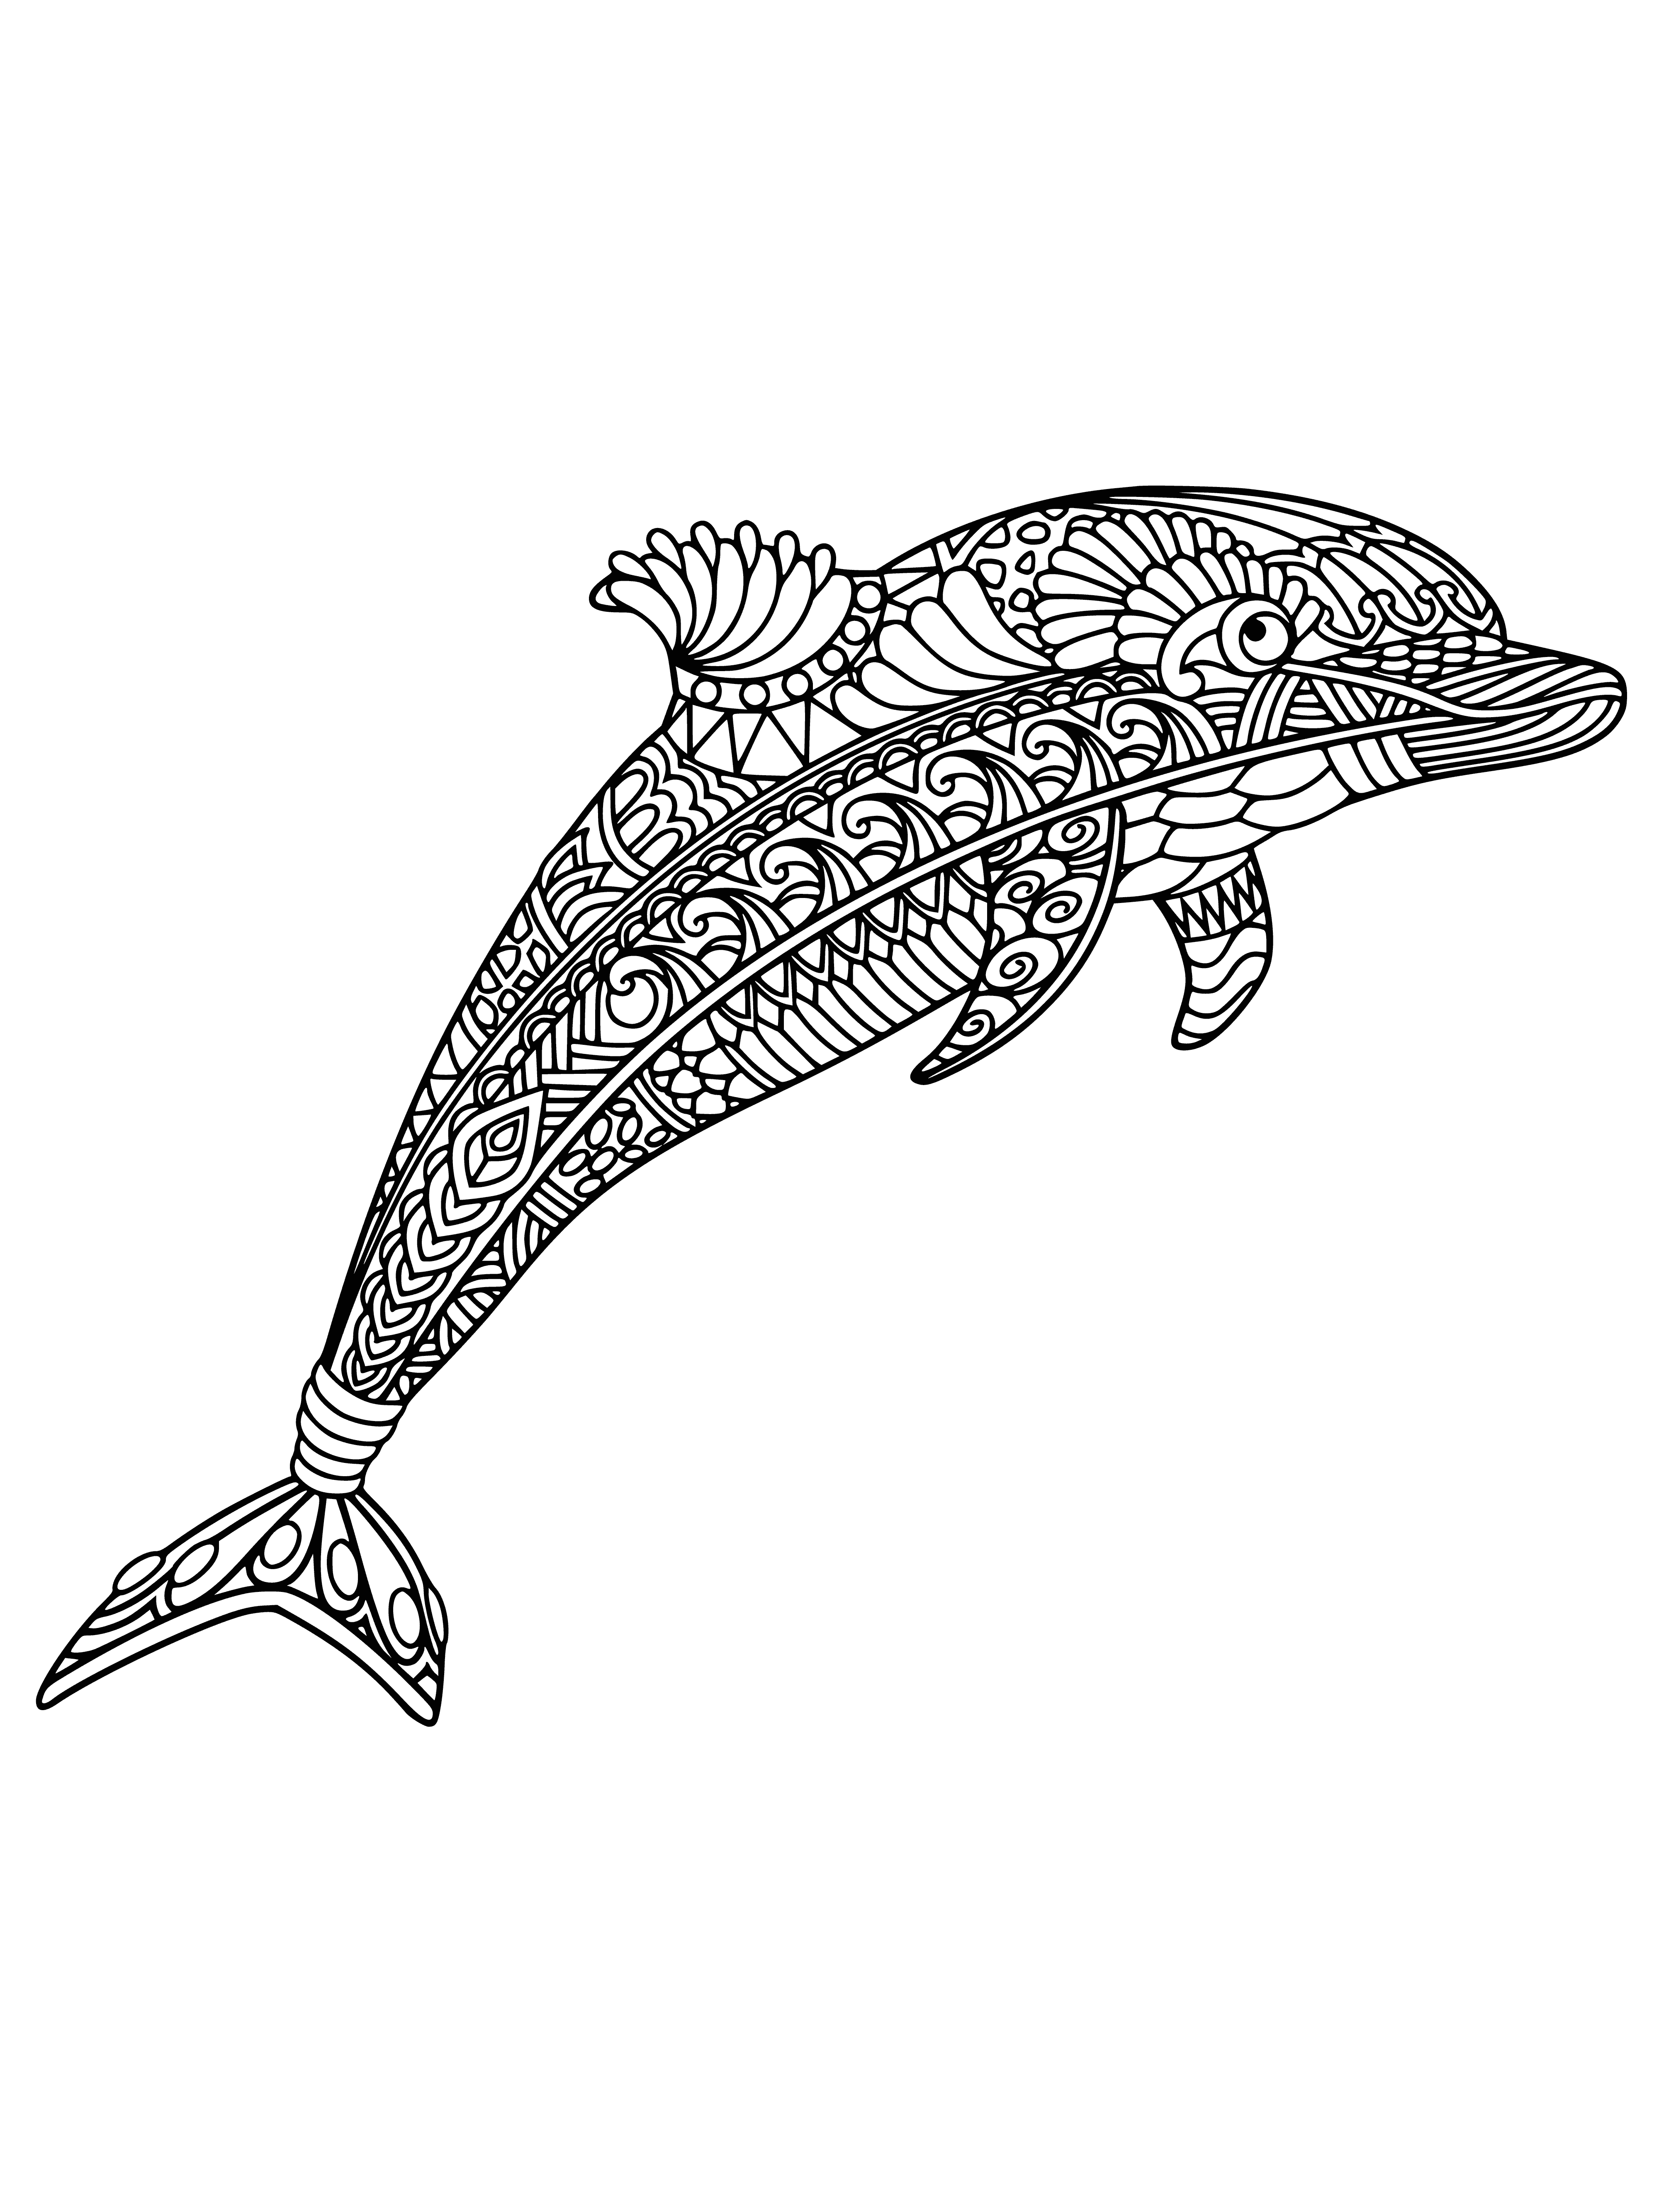 coloring page: A dolphin jumps and flips, surrounded by small fish and sun rays in a deep blue background. It is light blue with darker blue stripes.